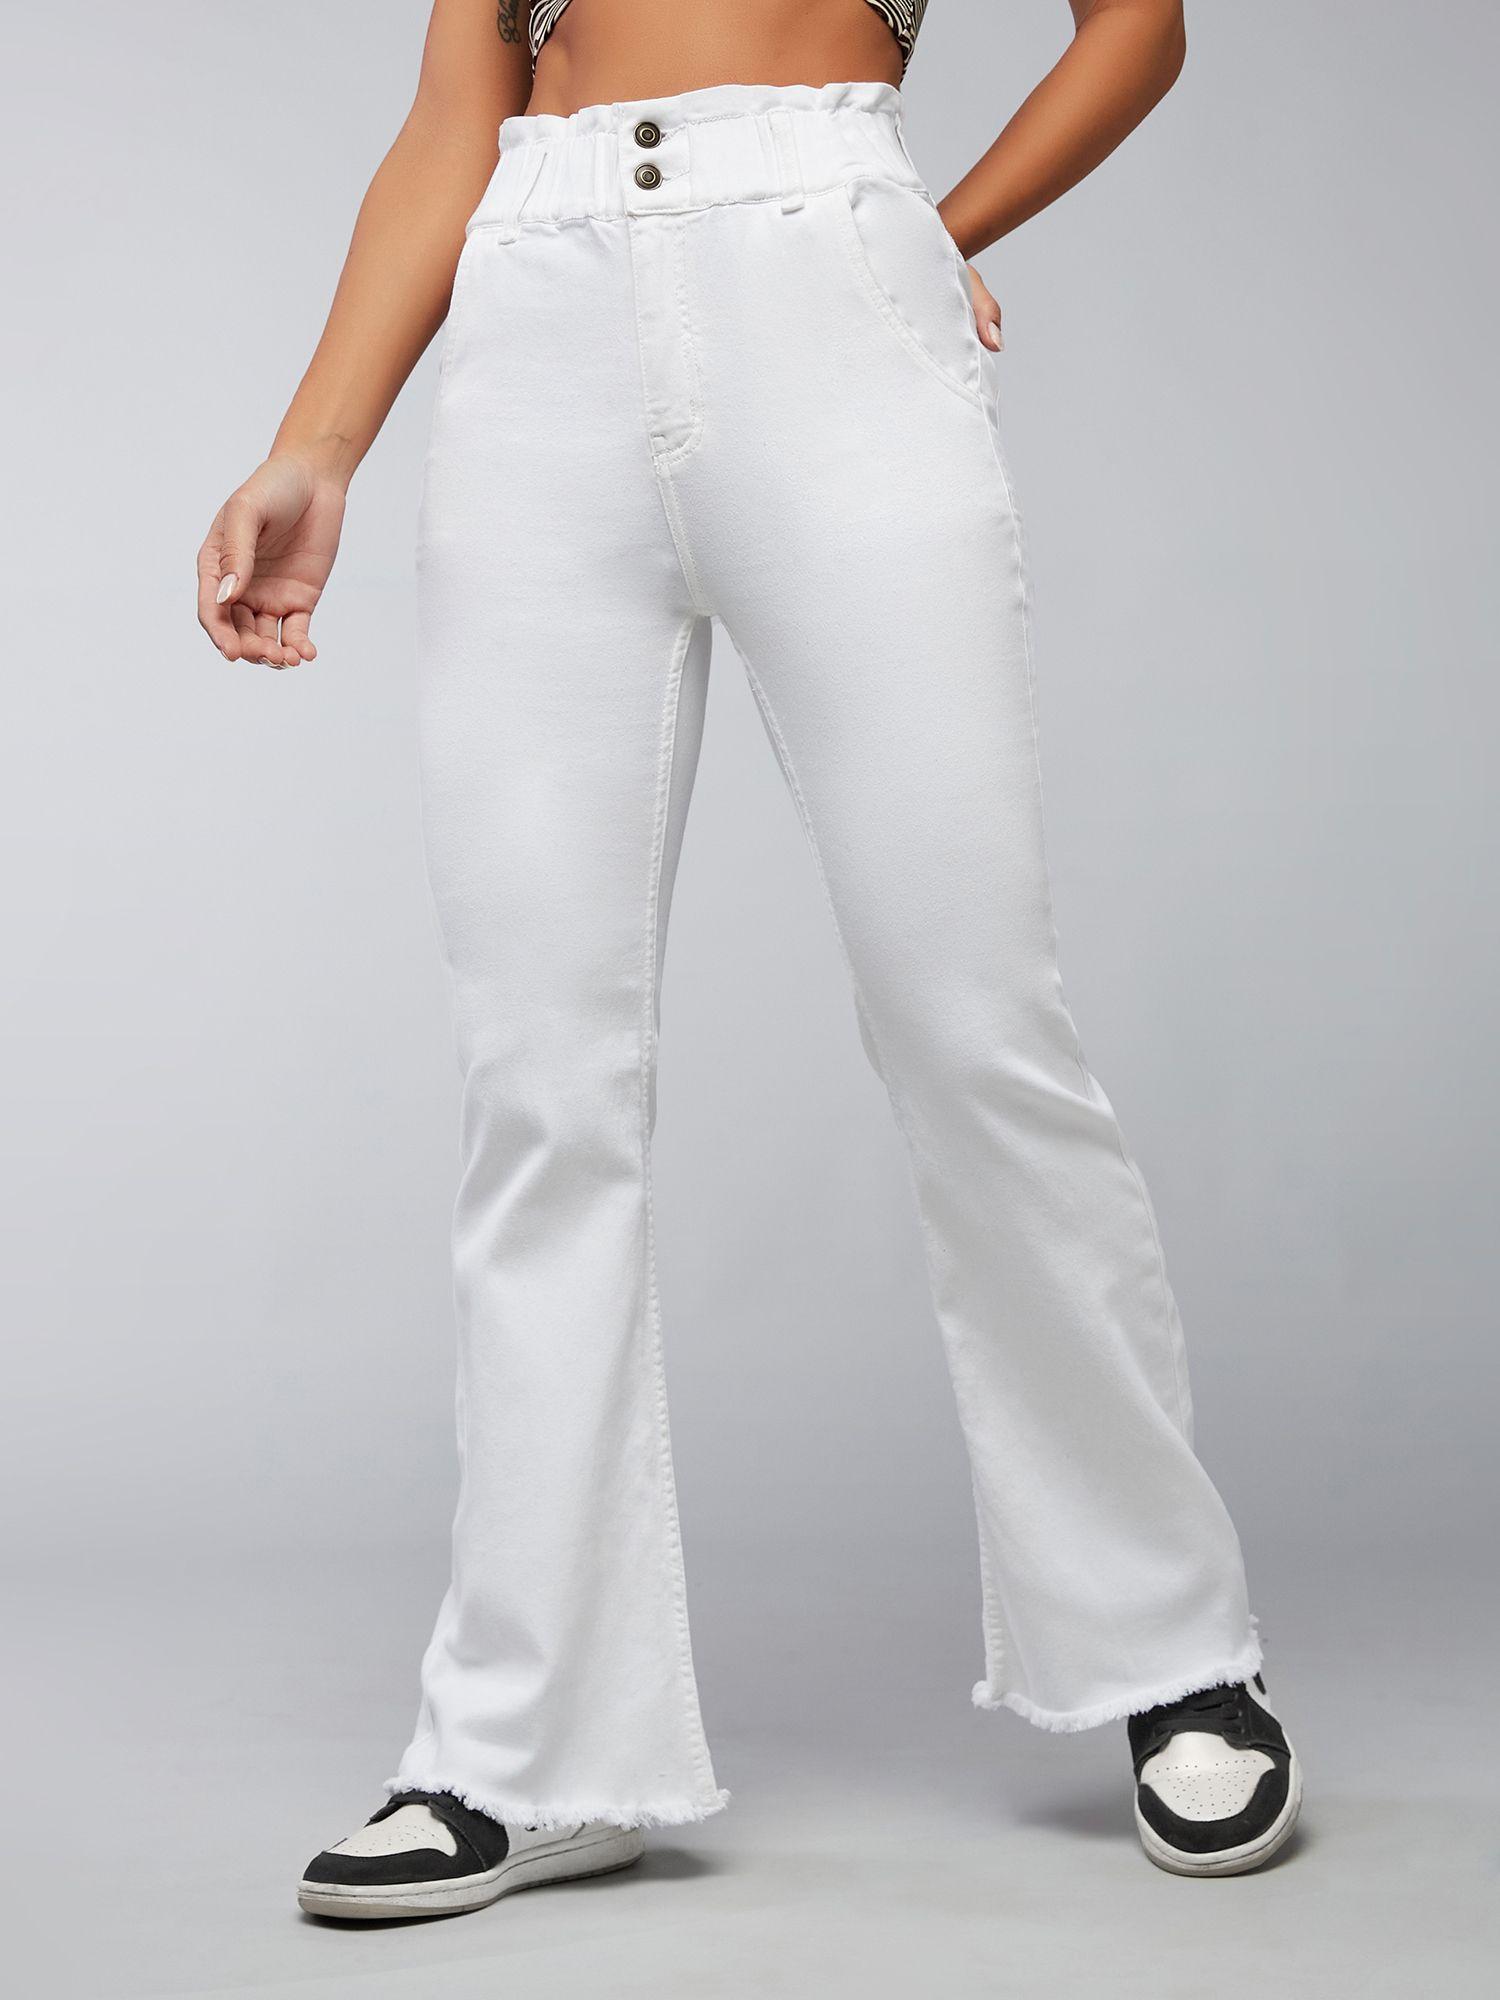 women's white flared high rise stretchable denim jeans